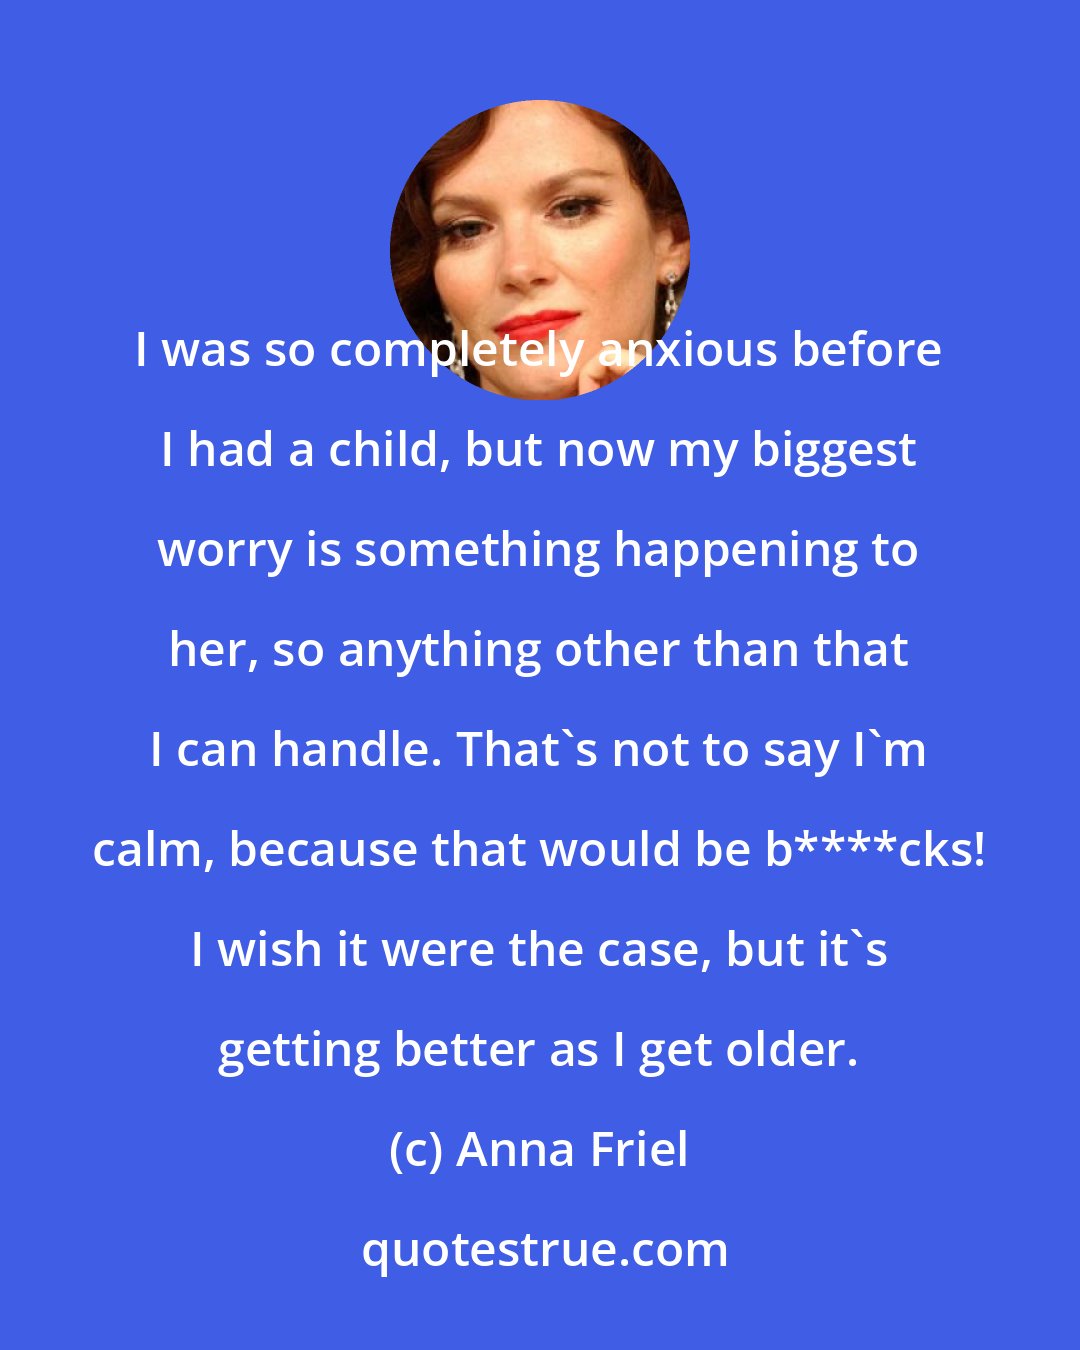 Anna Friel: I was so completely anxious before I had a child, but now my biggest worry is something happening to her, so anything other than that I can handle. That's not to say I'm calm, because that would be b****cks! I wish it were the case, but it's getting better as I get older.